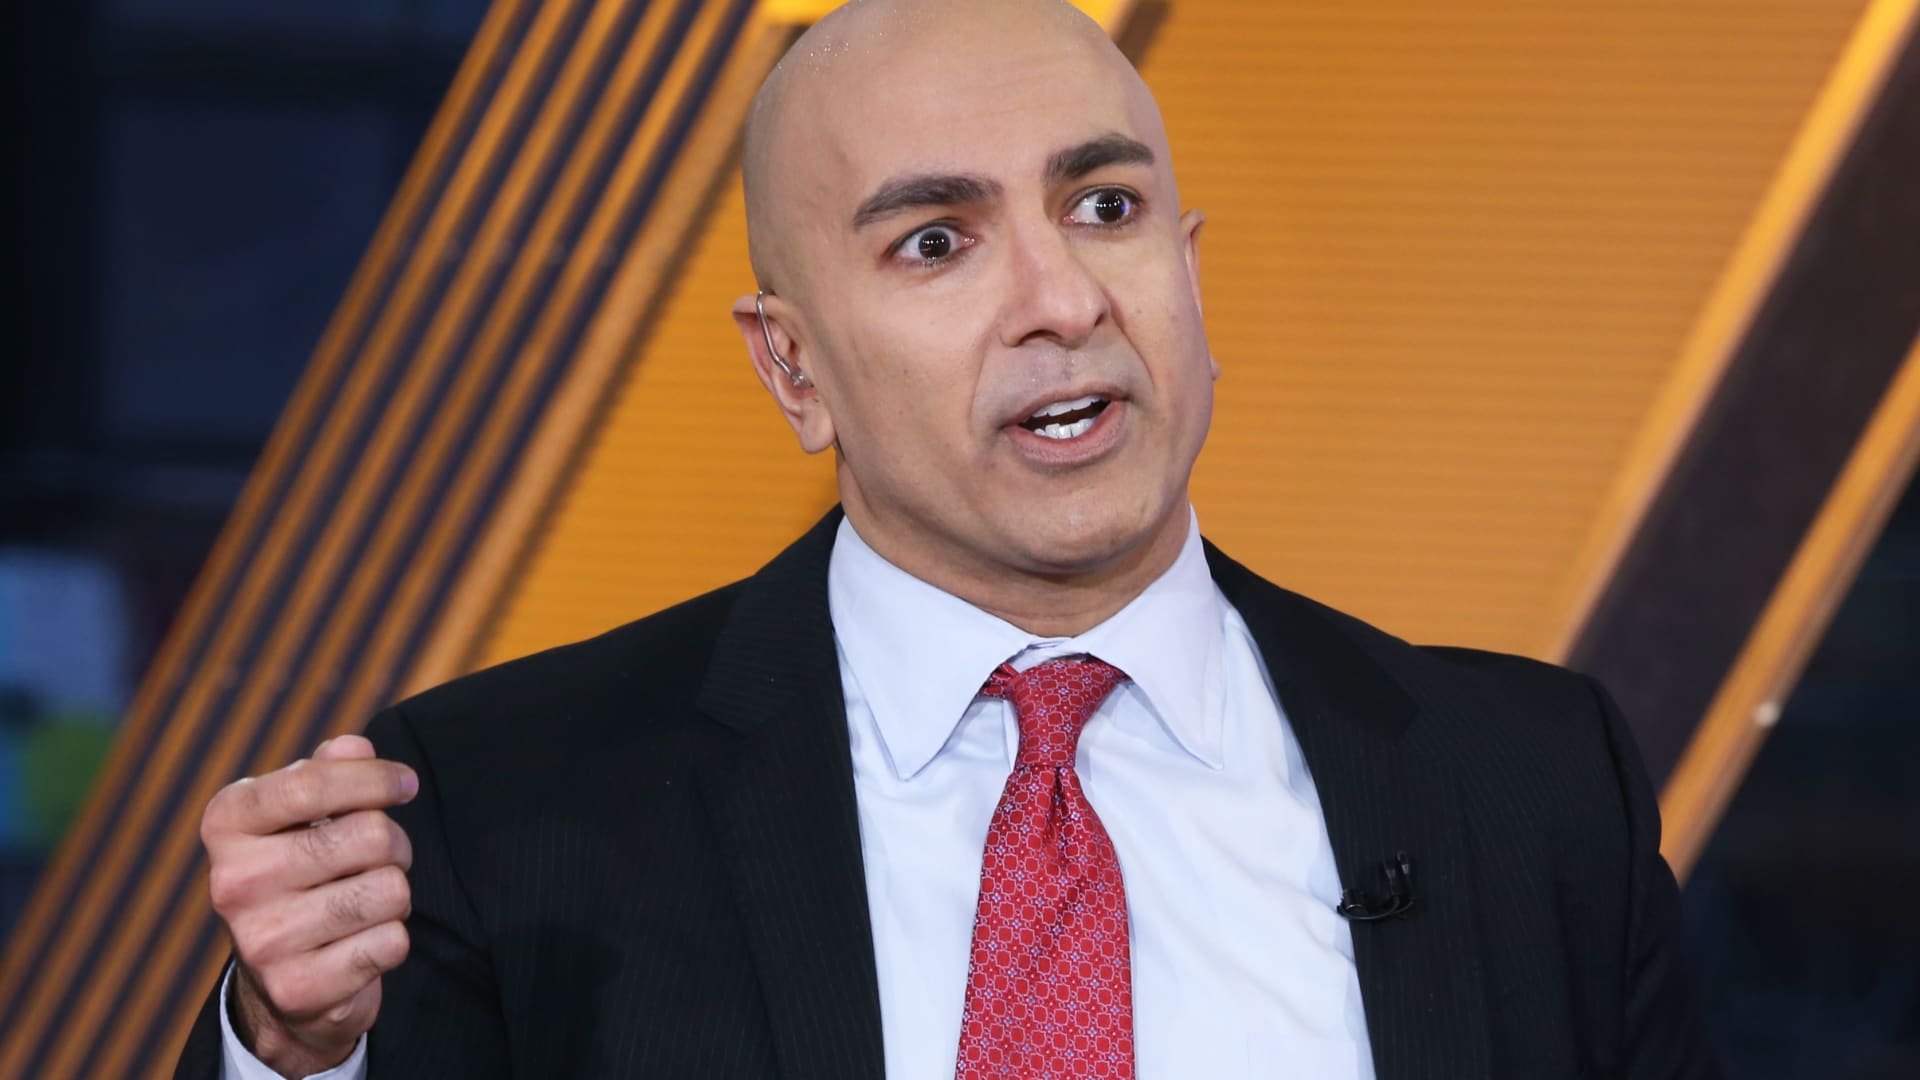 Fed's Kashkari says a June pause on rates wouldn't indicate an end to hiking cycle